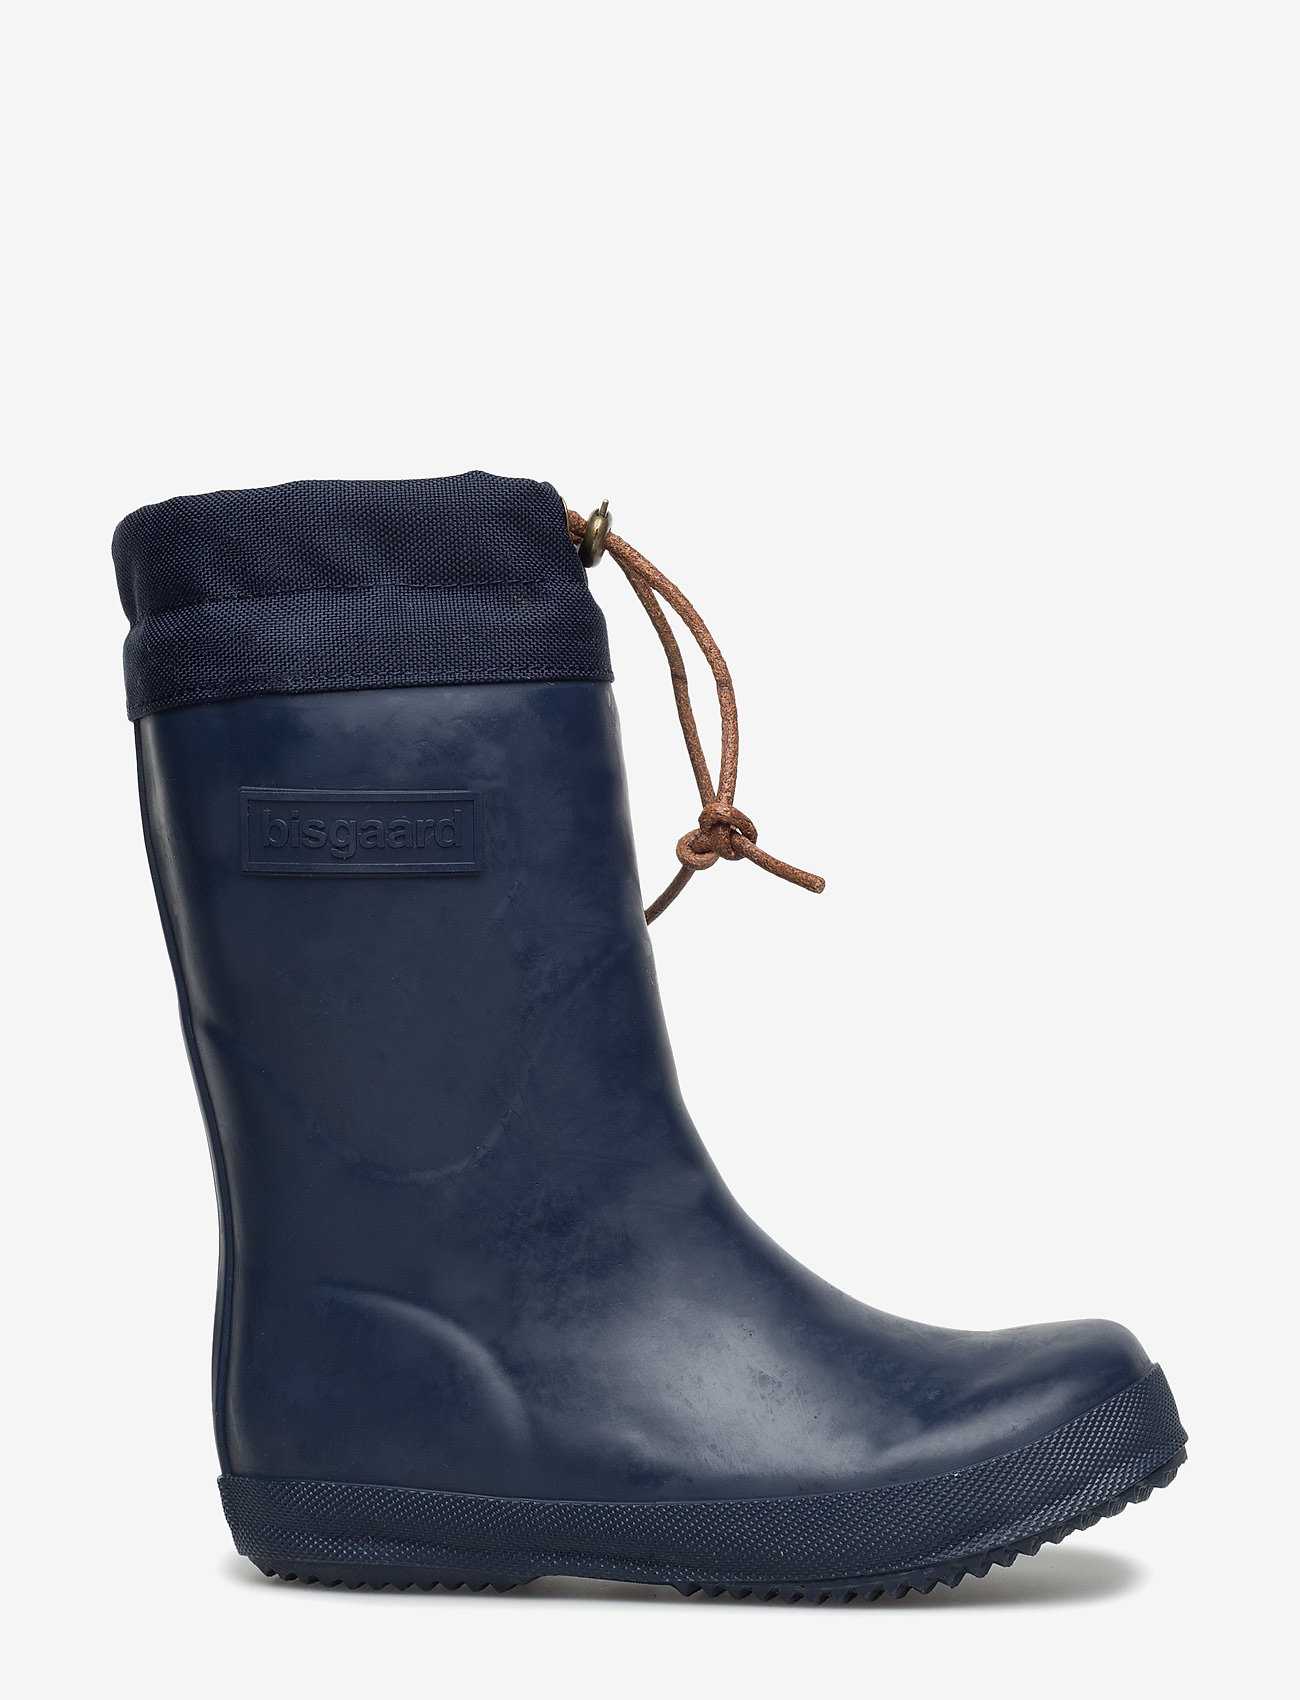 Bisgaard - Bisgaard Thermo - lined rubberboots - 20 blue - 1